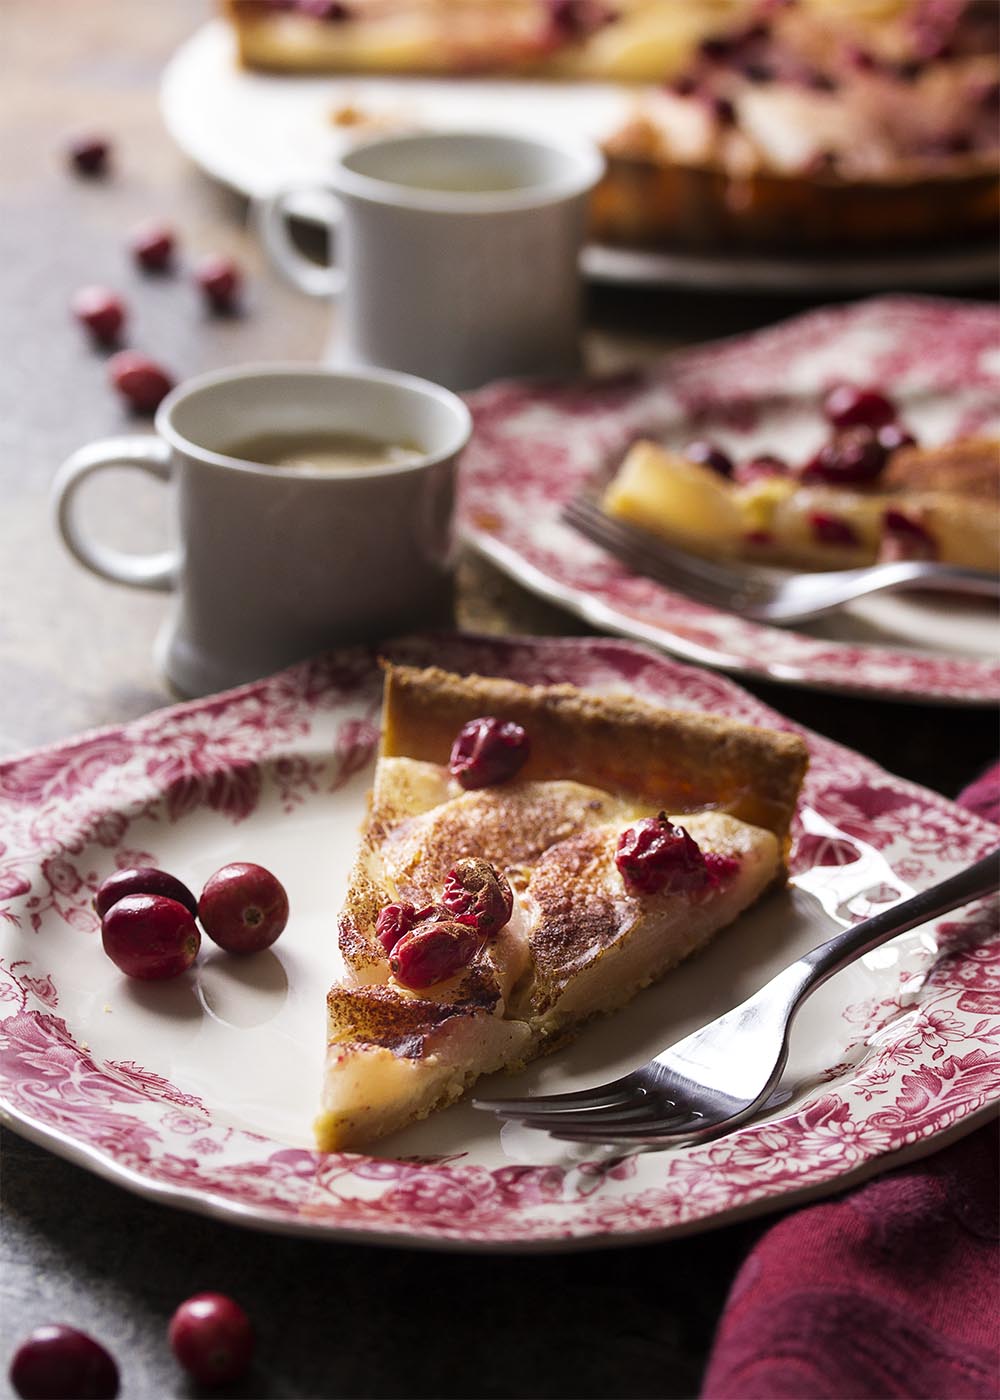 Ripe slices of pears and deep red cranberries combine with a simple custard and a dusting of cinnamon in this pear cranberry tart. Great for the holidays! | justalittlebitofbacon.com